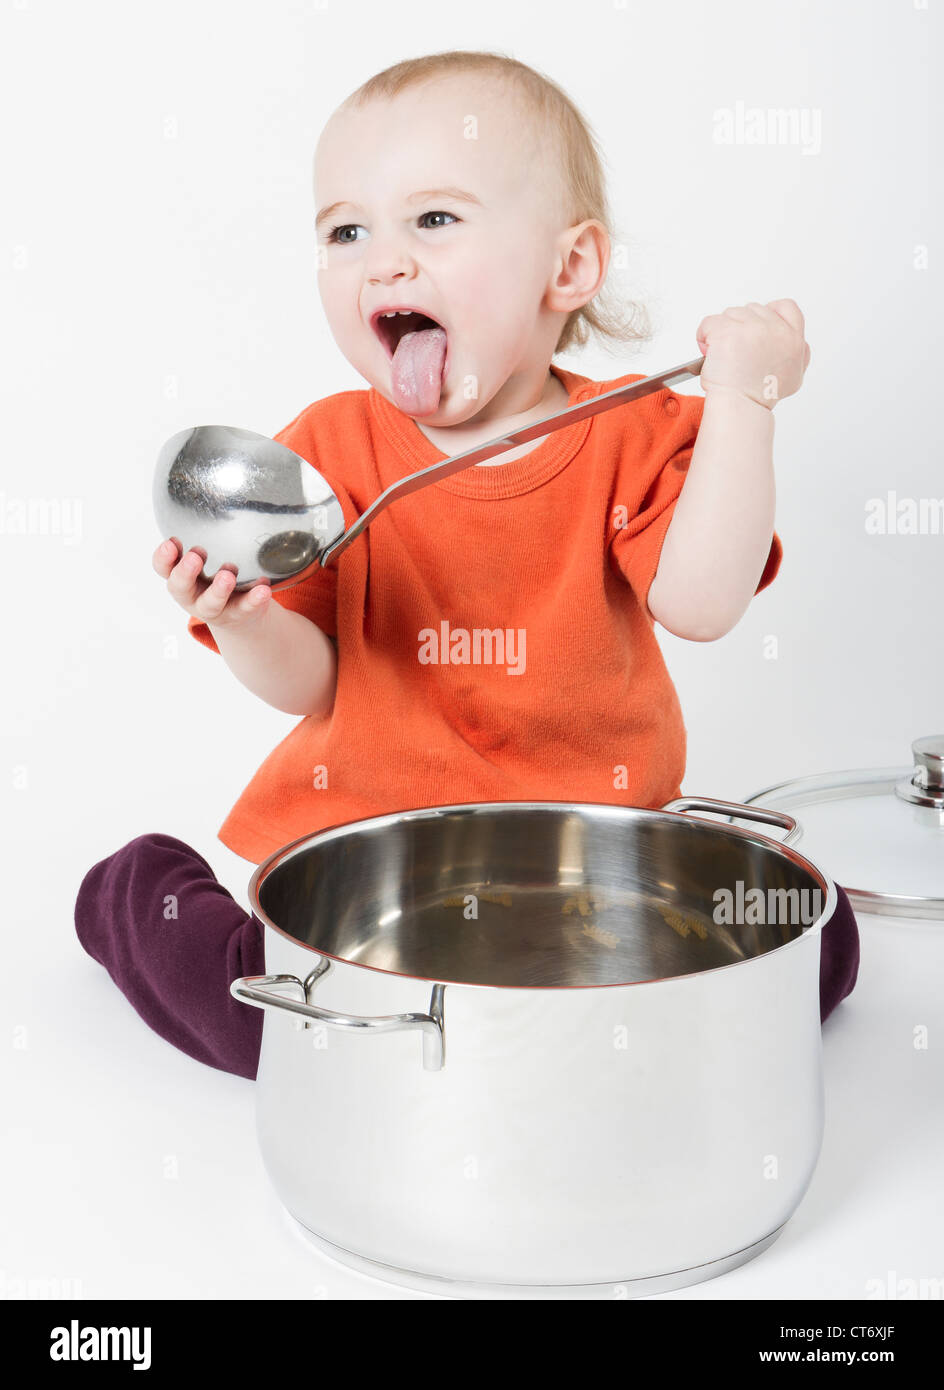 baby with big cooking pot isolated on neutral background Stock Photo